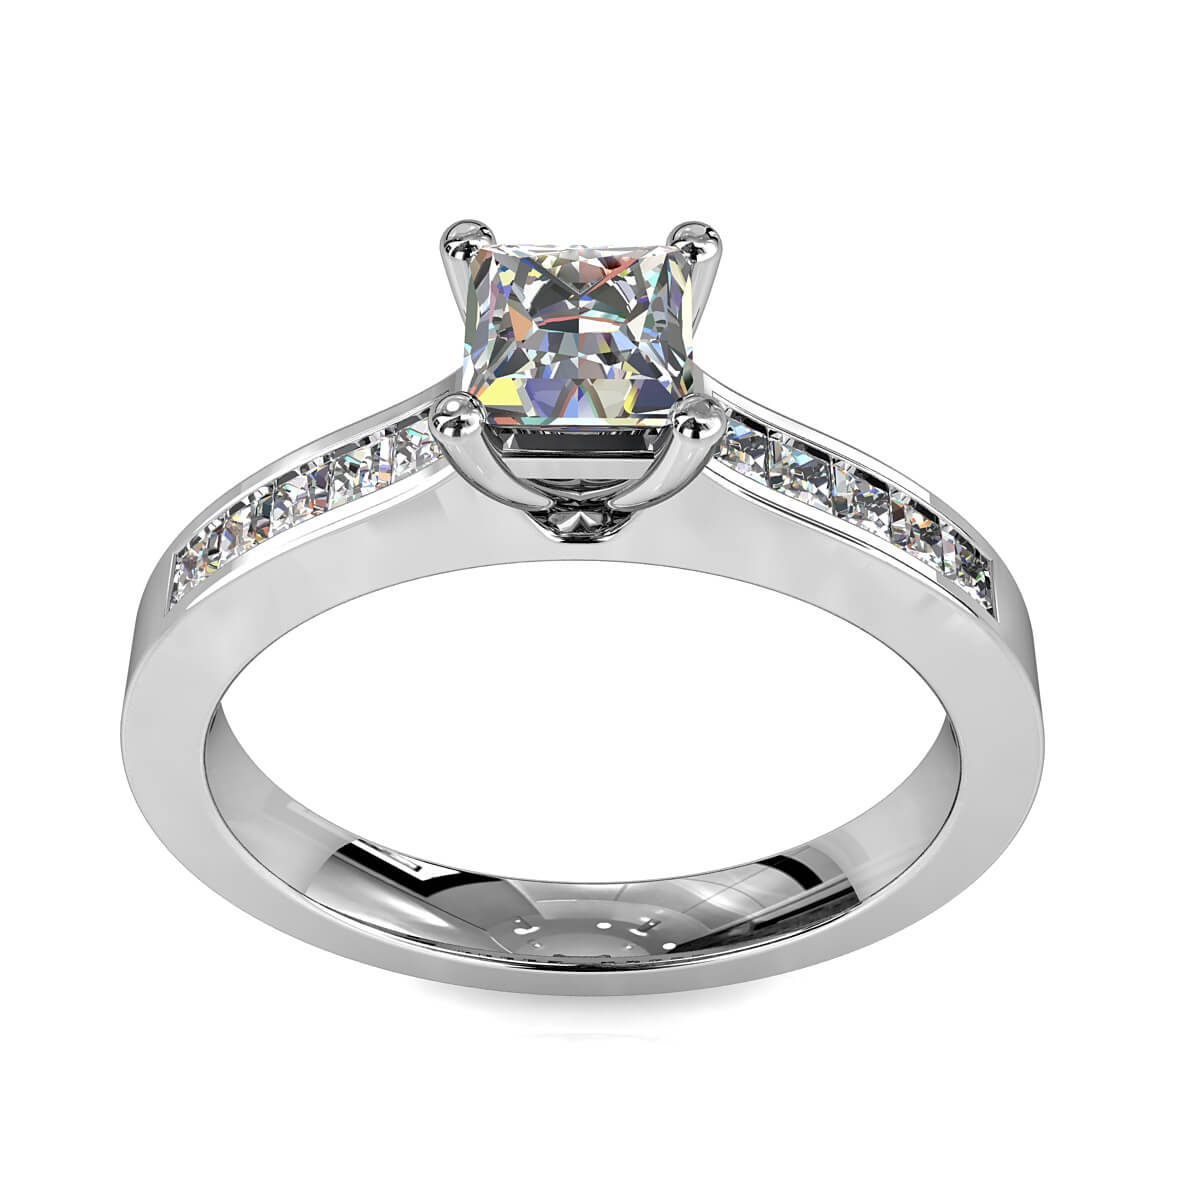 Princess Cut Solitaire Diamond Engagement Ring, 4 Claw Set on a Princess Channel Set Band.